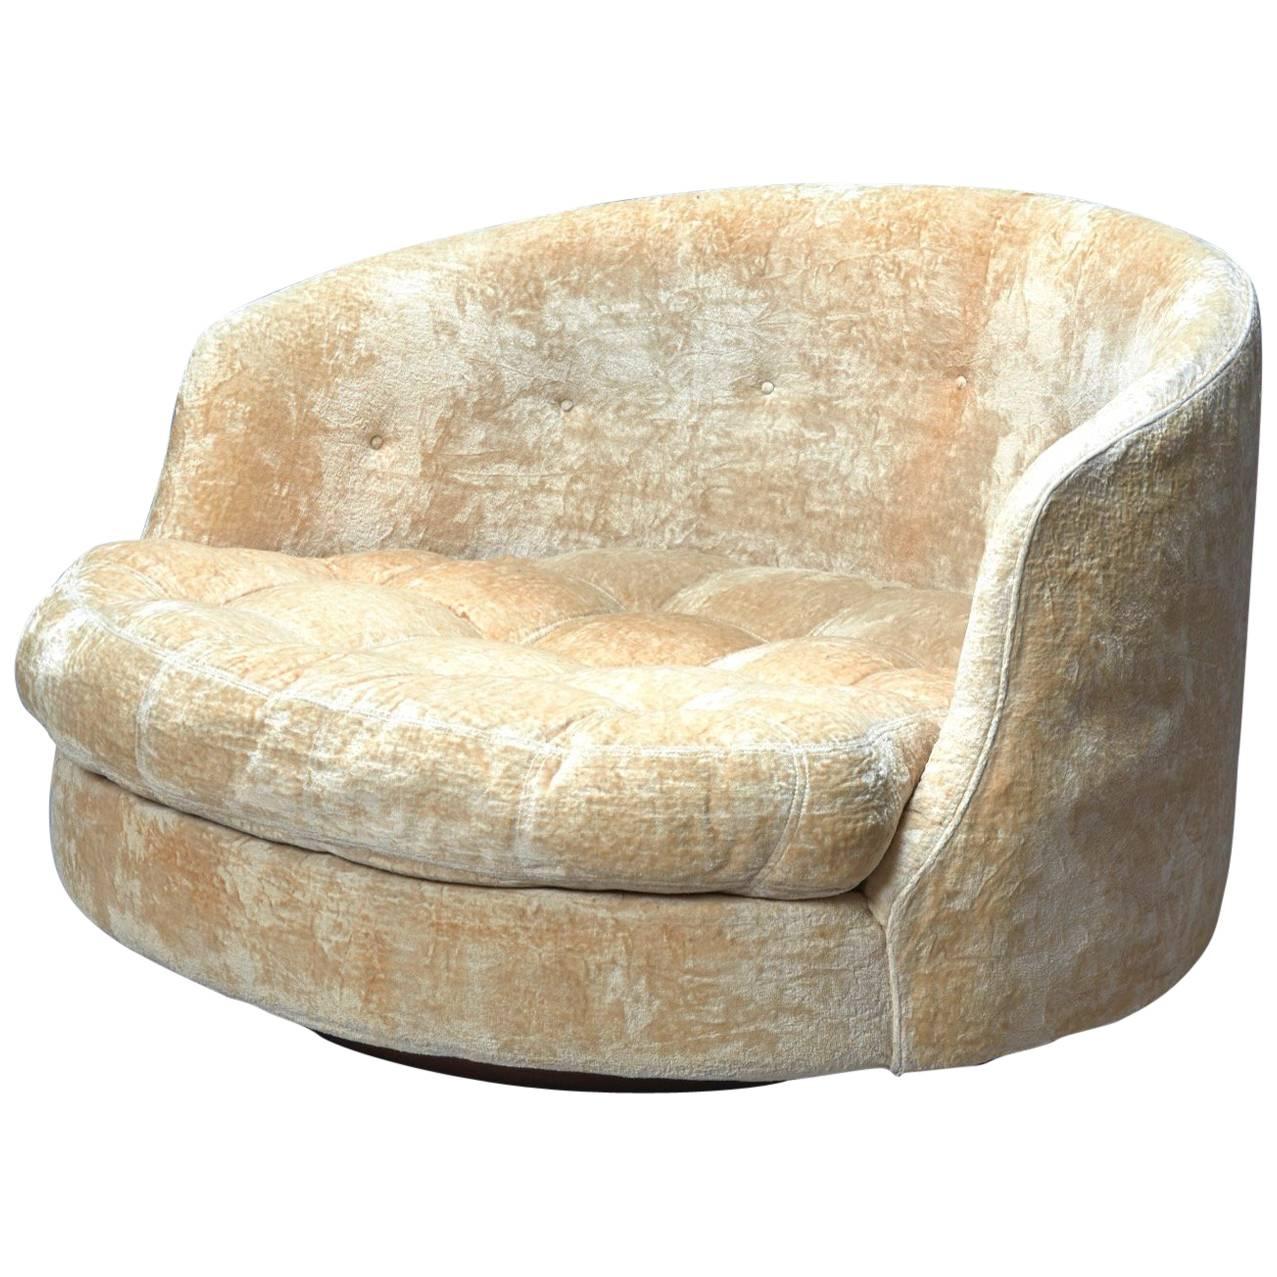 Large Round Swivel Lounge Chair by Milo Baughman for Thayer Coggin